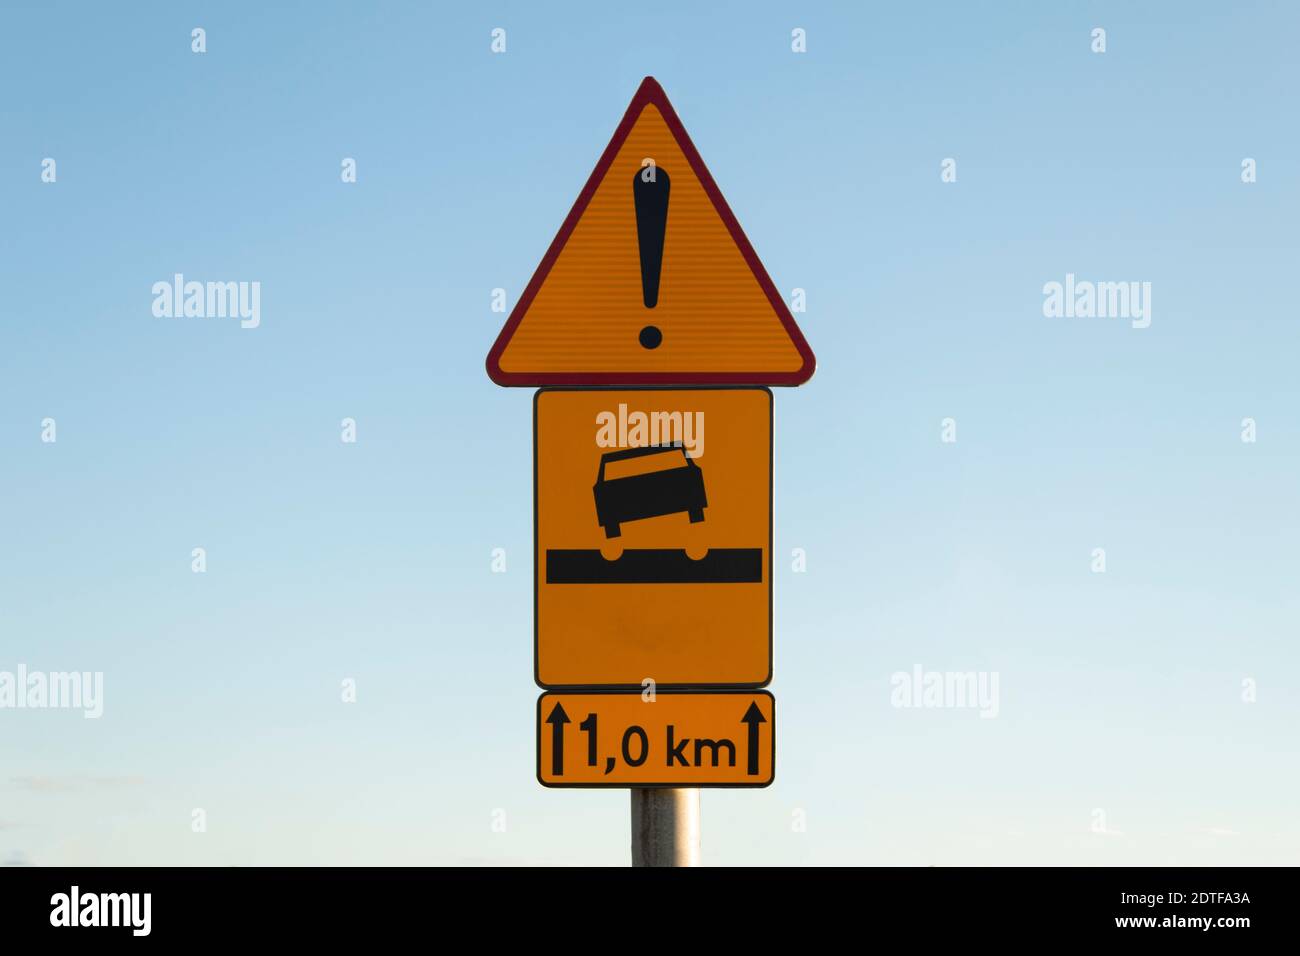 Road sign rough road and exclamation mark Stock Photo